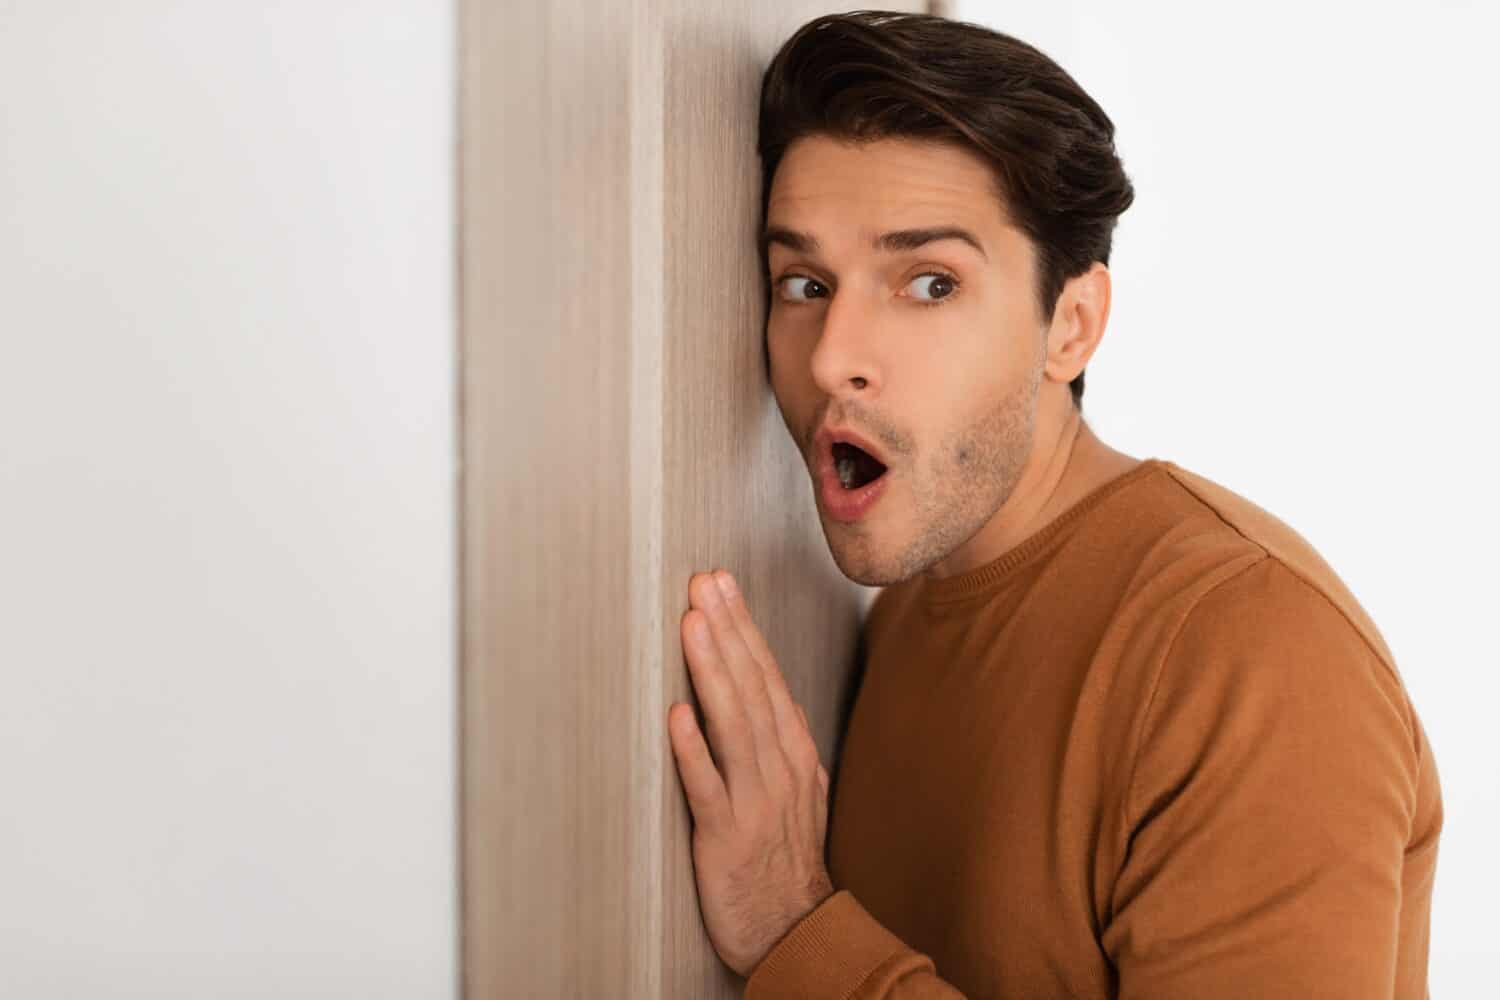 Closeup portrait of amazed man eavesdropping on private conversations, spying and listening through the door with a shocked expression at what he has overheard, man snooping leaning on wall